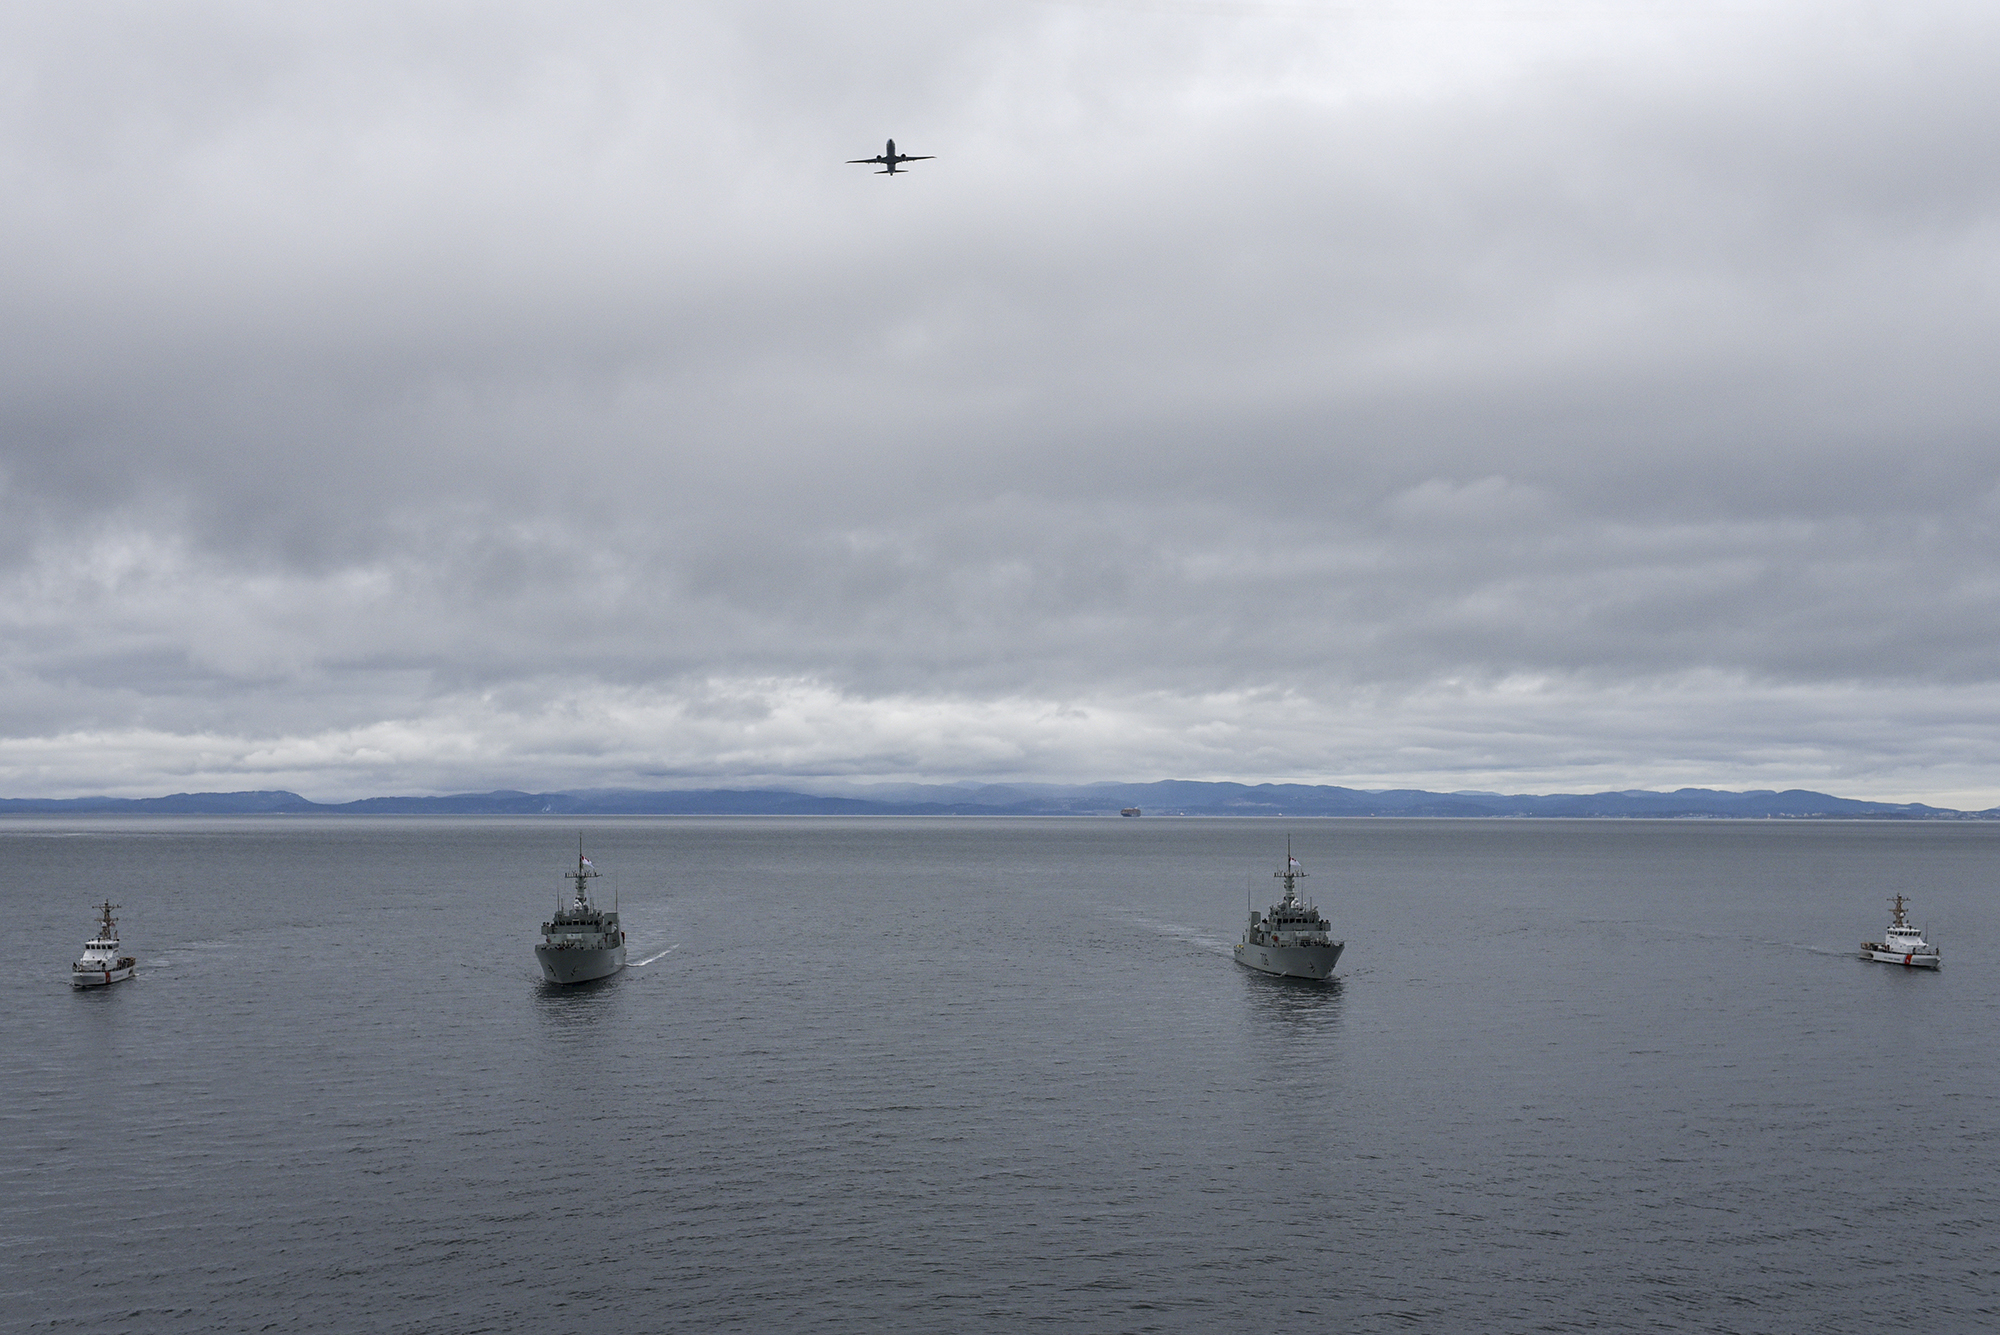 A U.S. Navy P-8 Poseidon Naval Air Station Whidbey Island aircraft flies over U.S. Coast Guard Cutter Blue Shark [WPB 87360] and U.S. Coast Guard Cutter Osprey [WPB 87307] as they transit alongside HMCS Saskatoon and HMCS Yellowknife from the Royal Canadian Navy during a joint exercise in the Salish Sea on Feb. 17, 2022. During a deployment scheduled for later this spring, HMCS Saskatoon and HMCS Yellowknife will work closely with the U.S. Coast Guard and U.S. Navy. Photo: U.S. Coast Guard